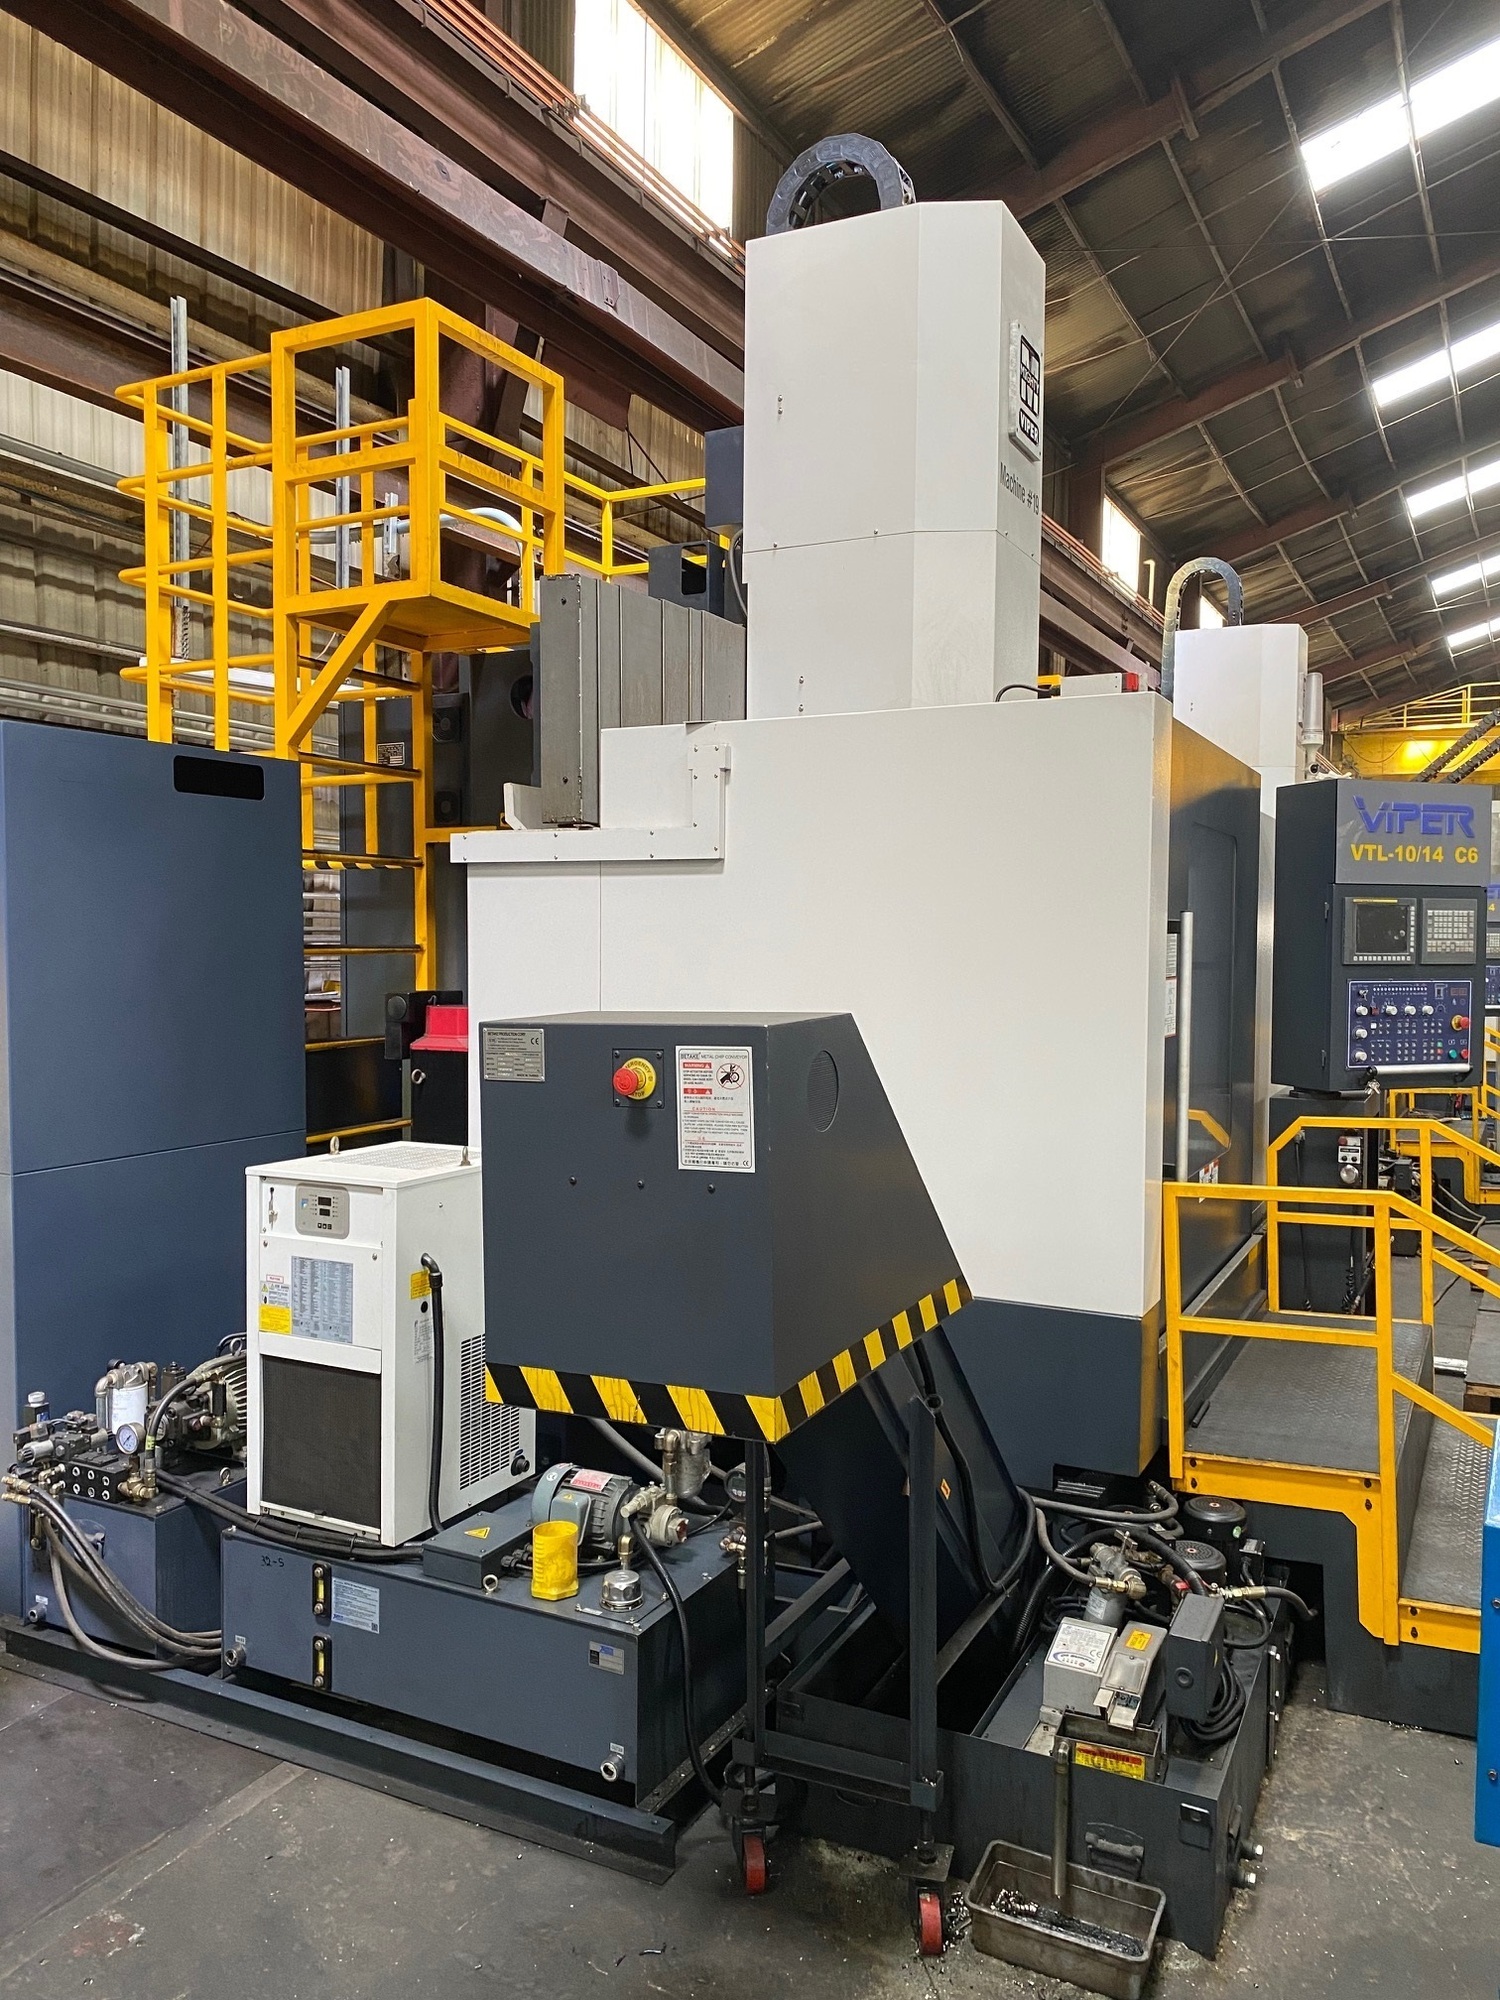 2018 MIGHTY VIPER VTL 10/14 Lathes & Turning, Lathes, VTL | EMC Leasing Company